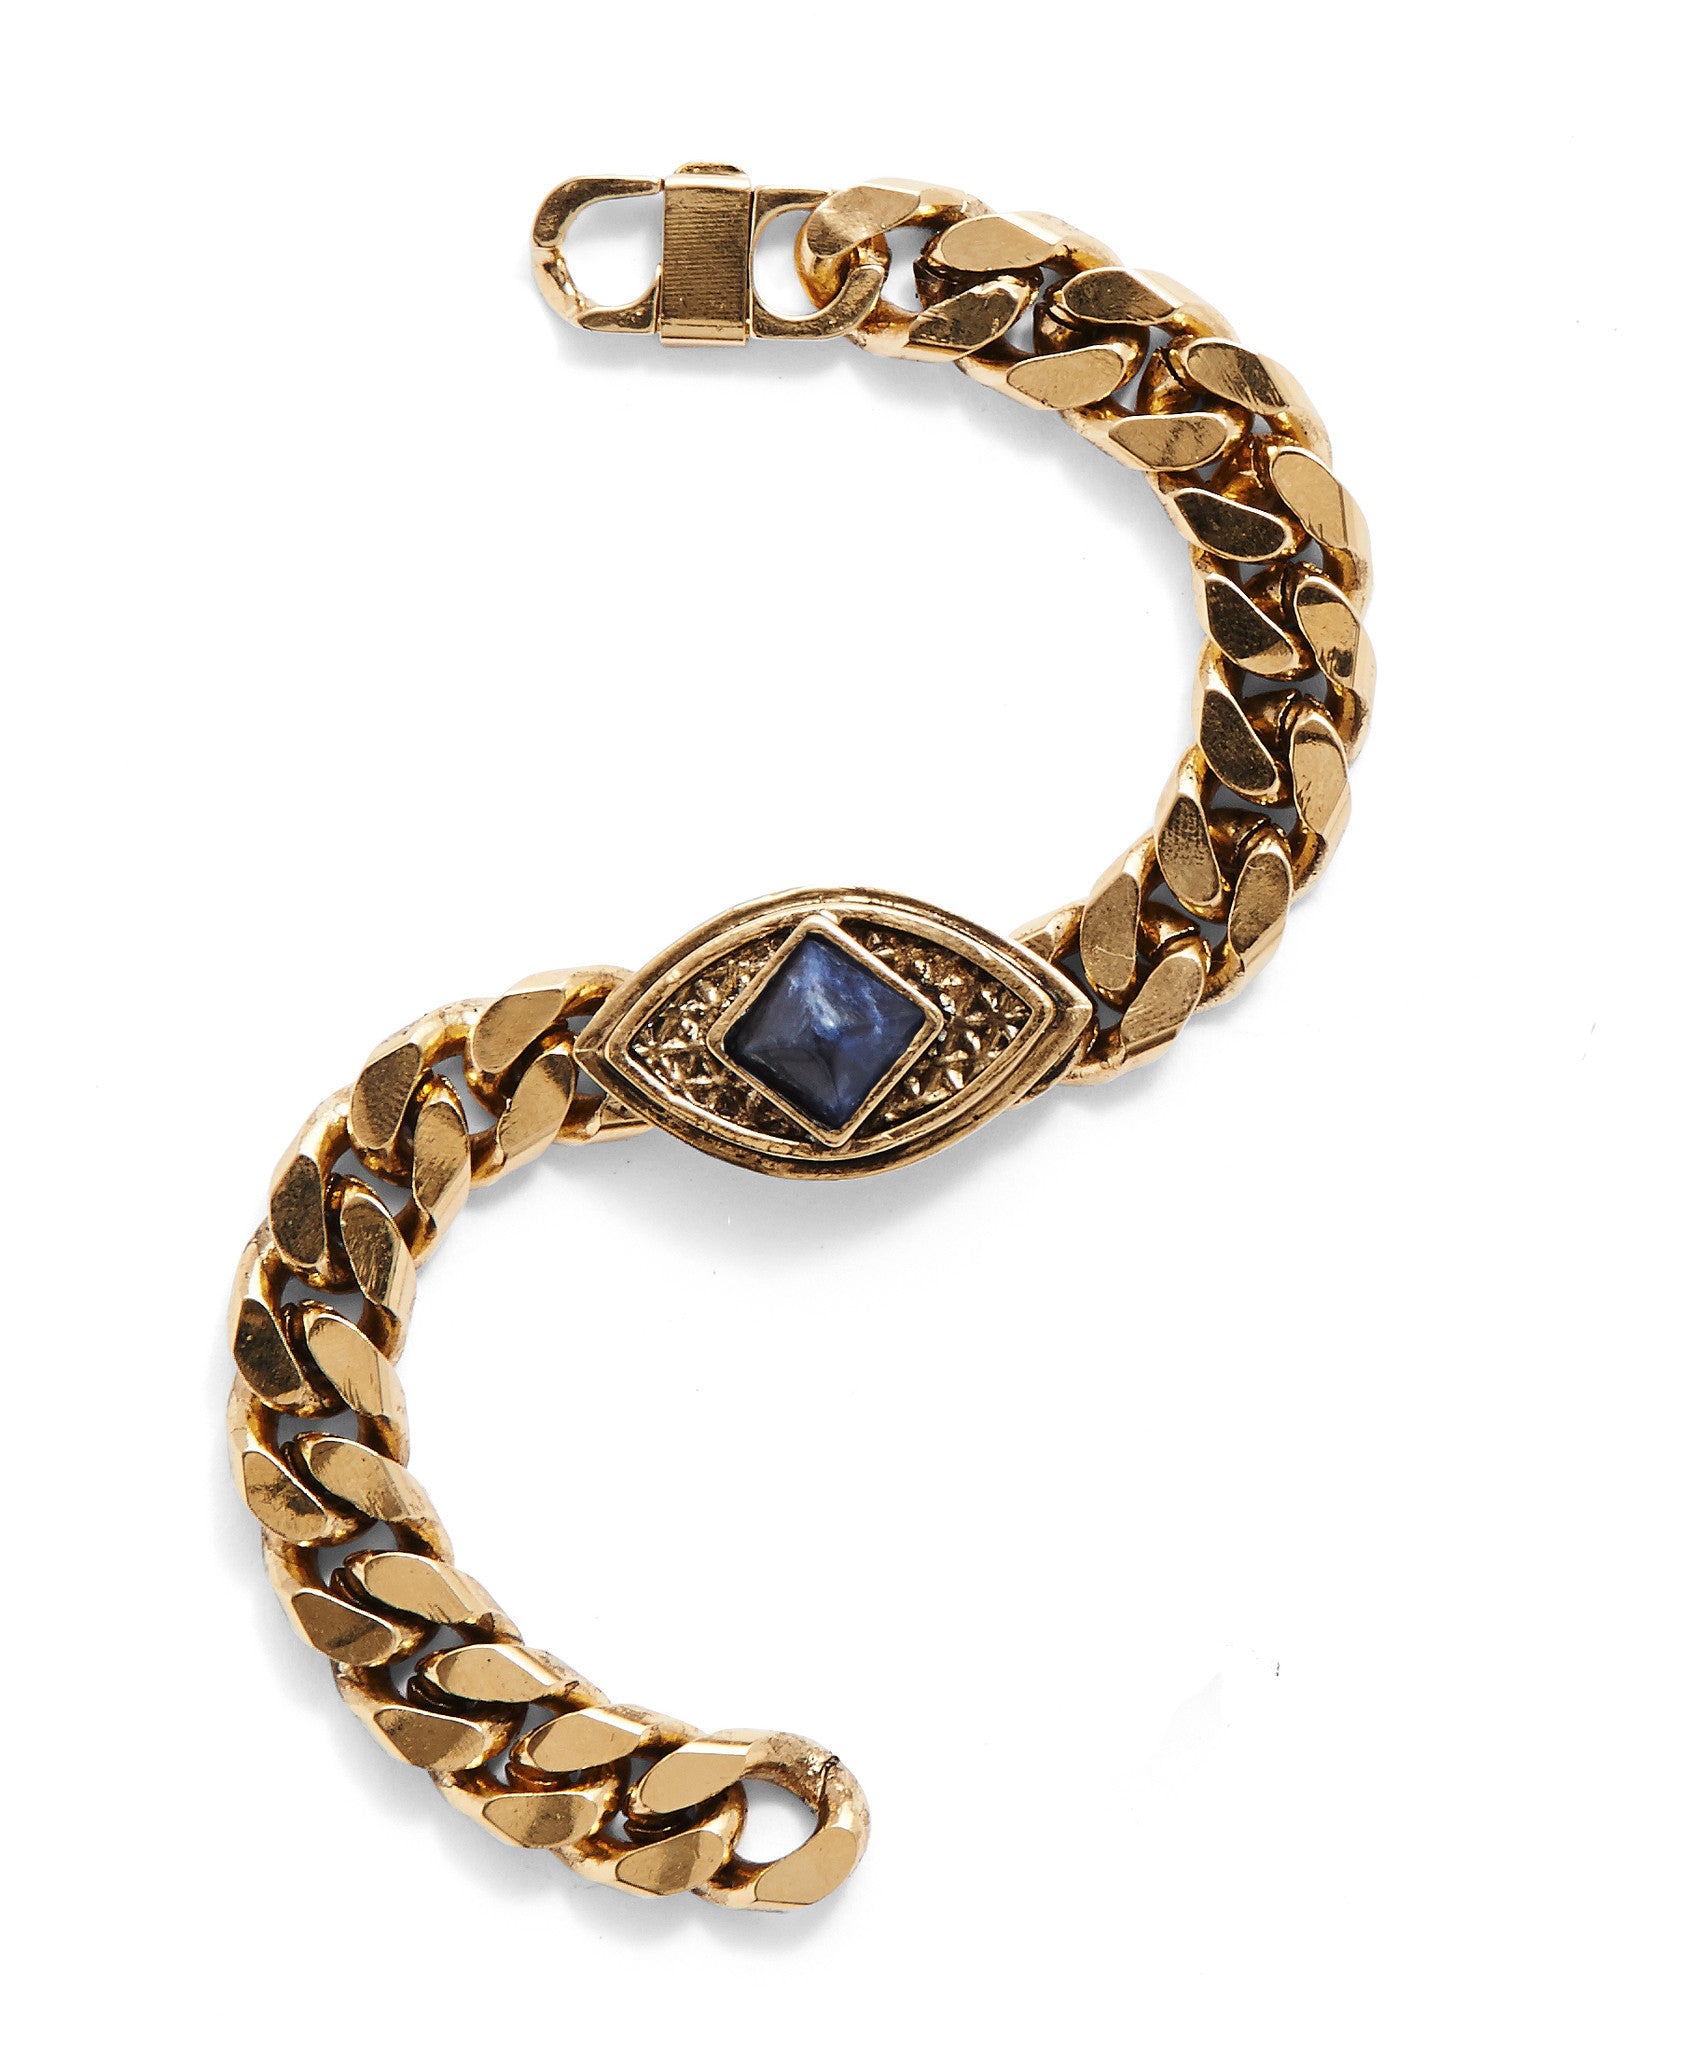 Lucid Chain Bracelet in Gold with Sodalite – Lady Grey